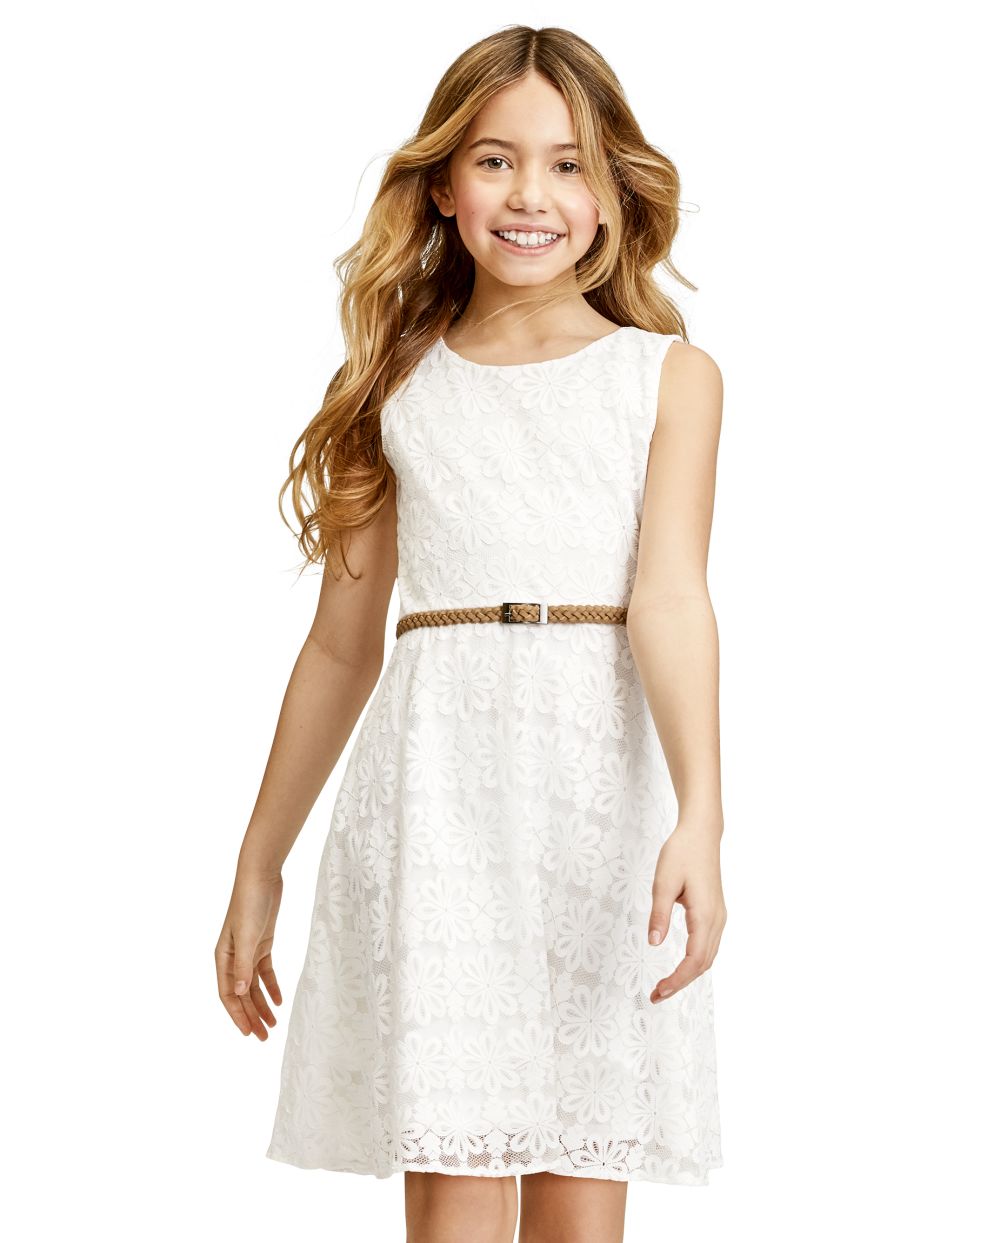 

Girls Lace Cut Out Dress - White - The Children's Place